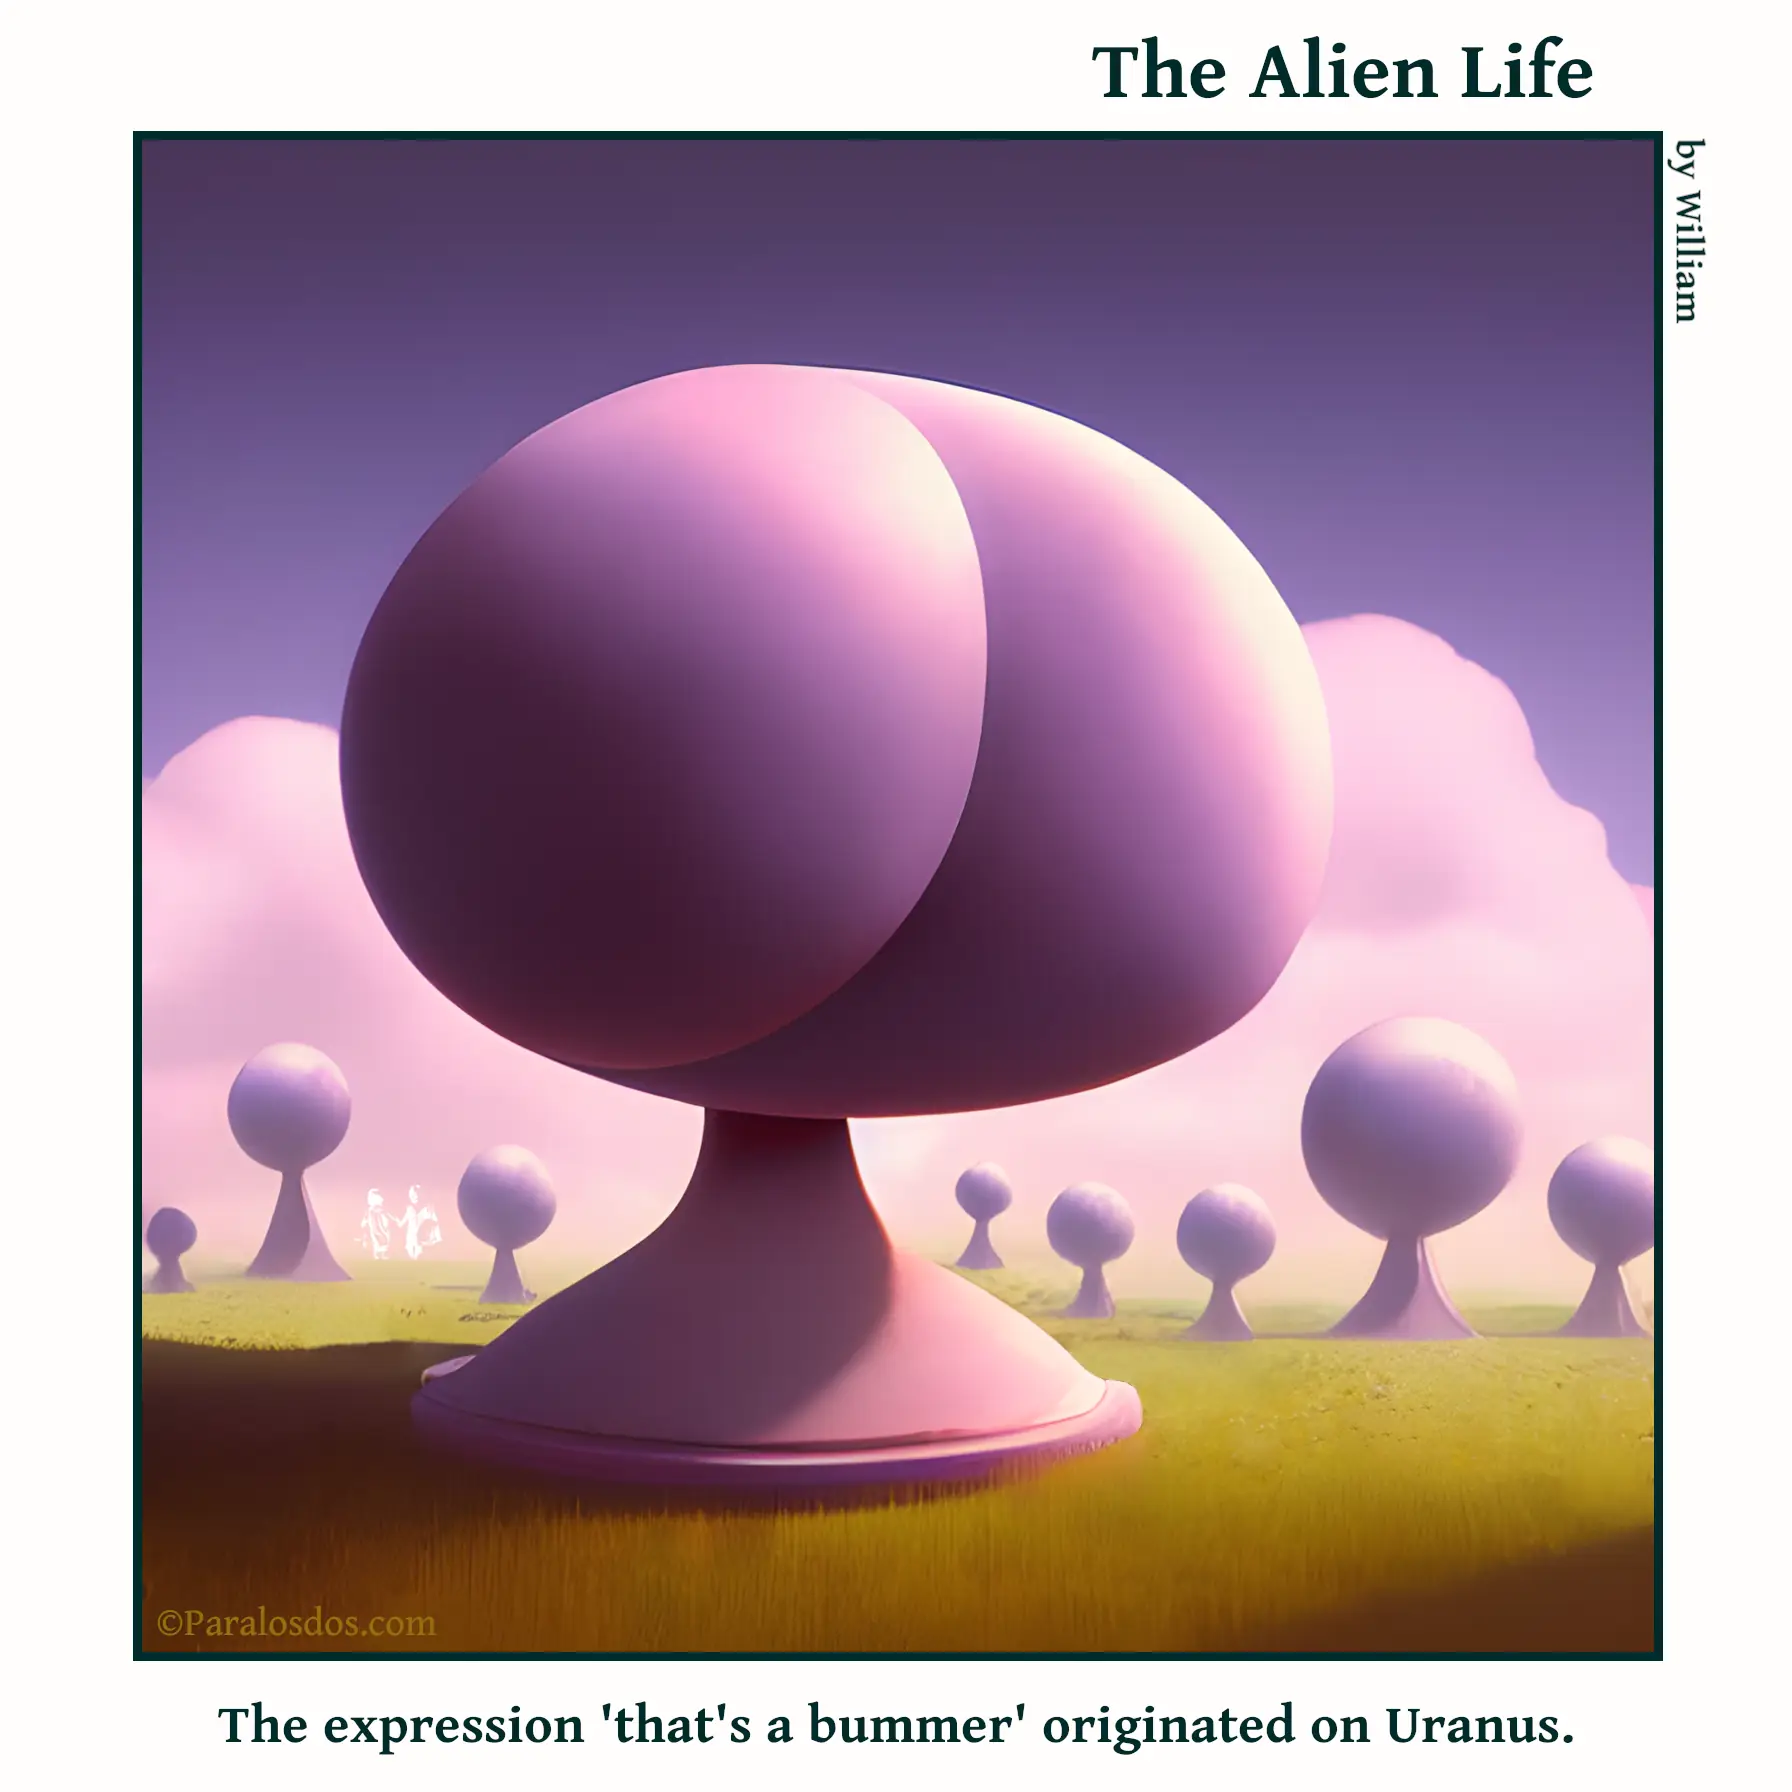 The Alien Life, one panel Comic. A field of roundish purple statues, the one in the foreground looks like a bum. The caption reads: The expression 'that's a bummer' originated on Uranus.